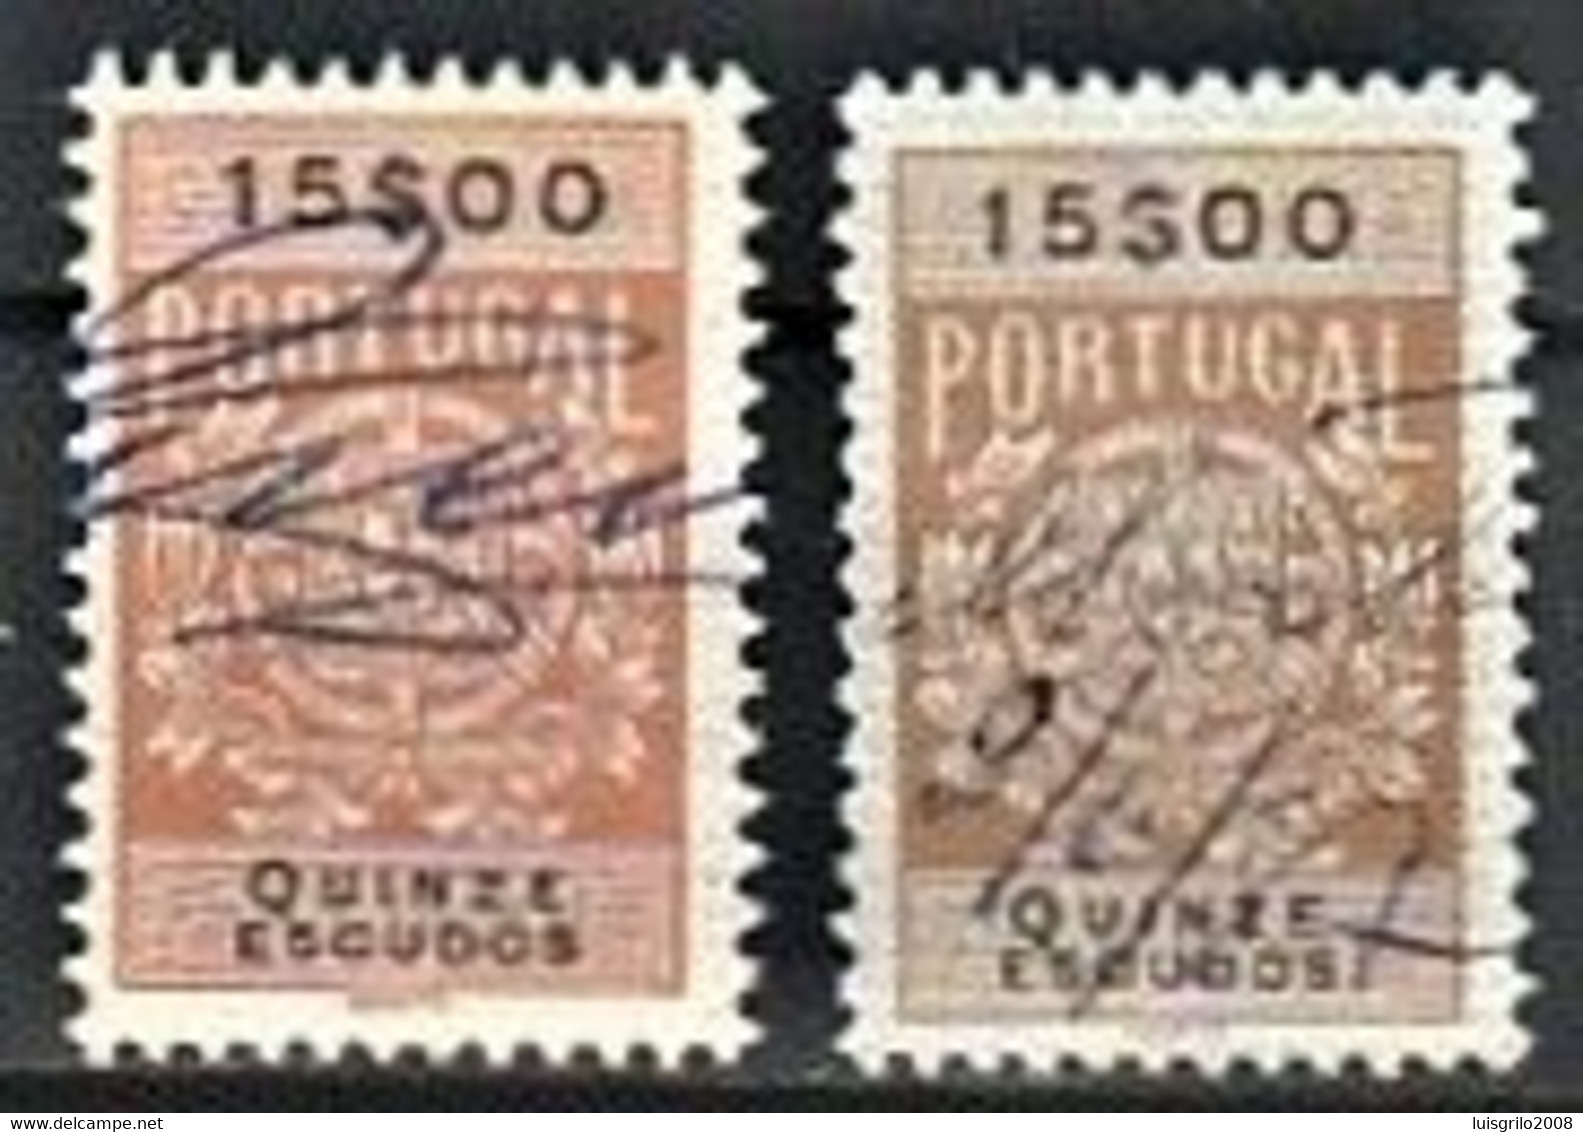 Fiscal/ Revenue, Portugal 1940 - Estampilha Fiscal -|- 15$00 - COLOR VARIANT - Is The Stamp Of The Right - Oblitérés